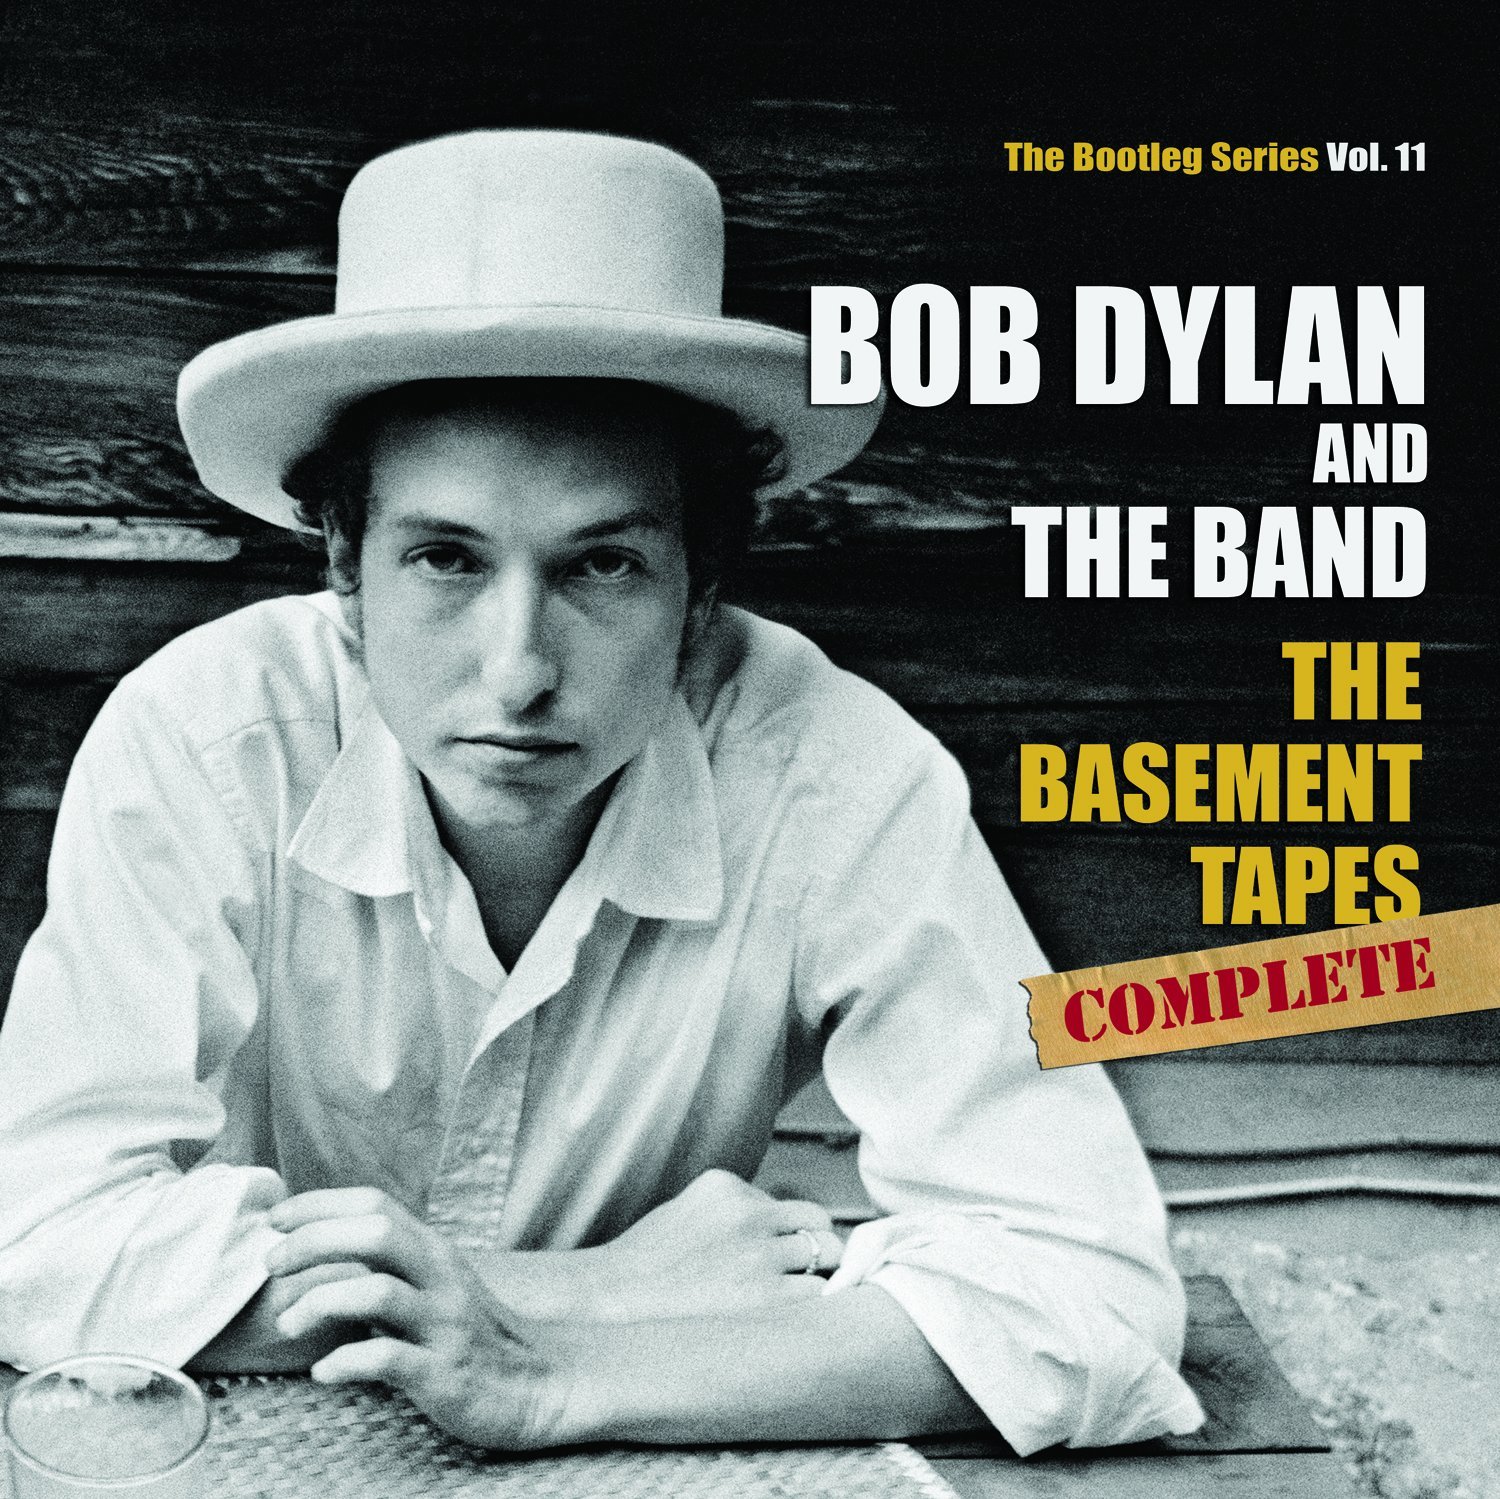 Dylan’s New ‘Basement Tapes’ Box Set Documents Rock’s Most Important Recordings